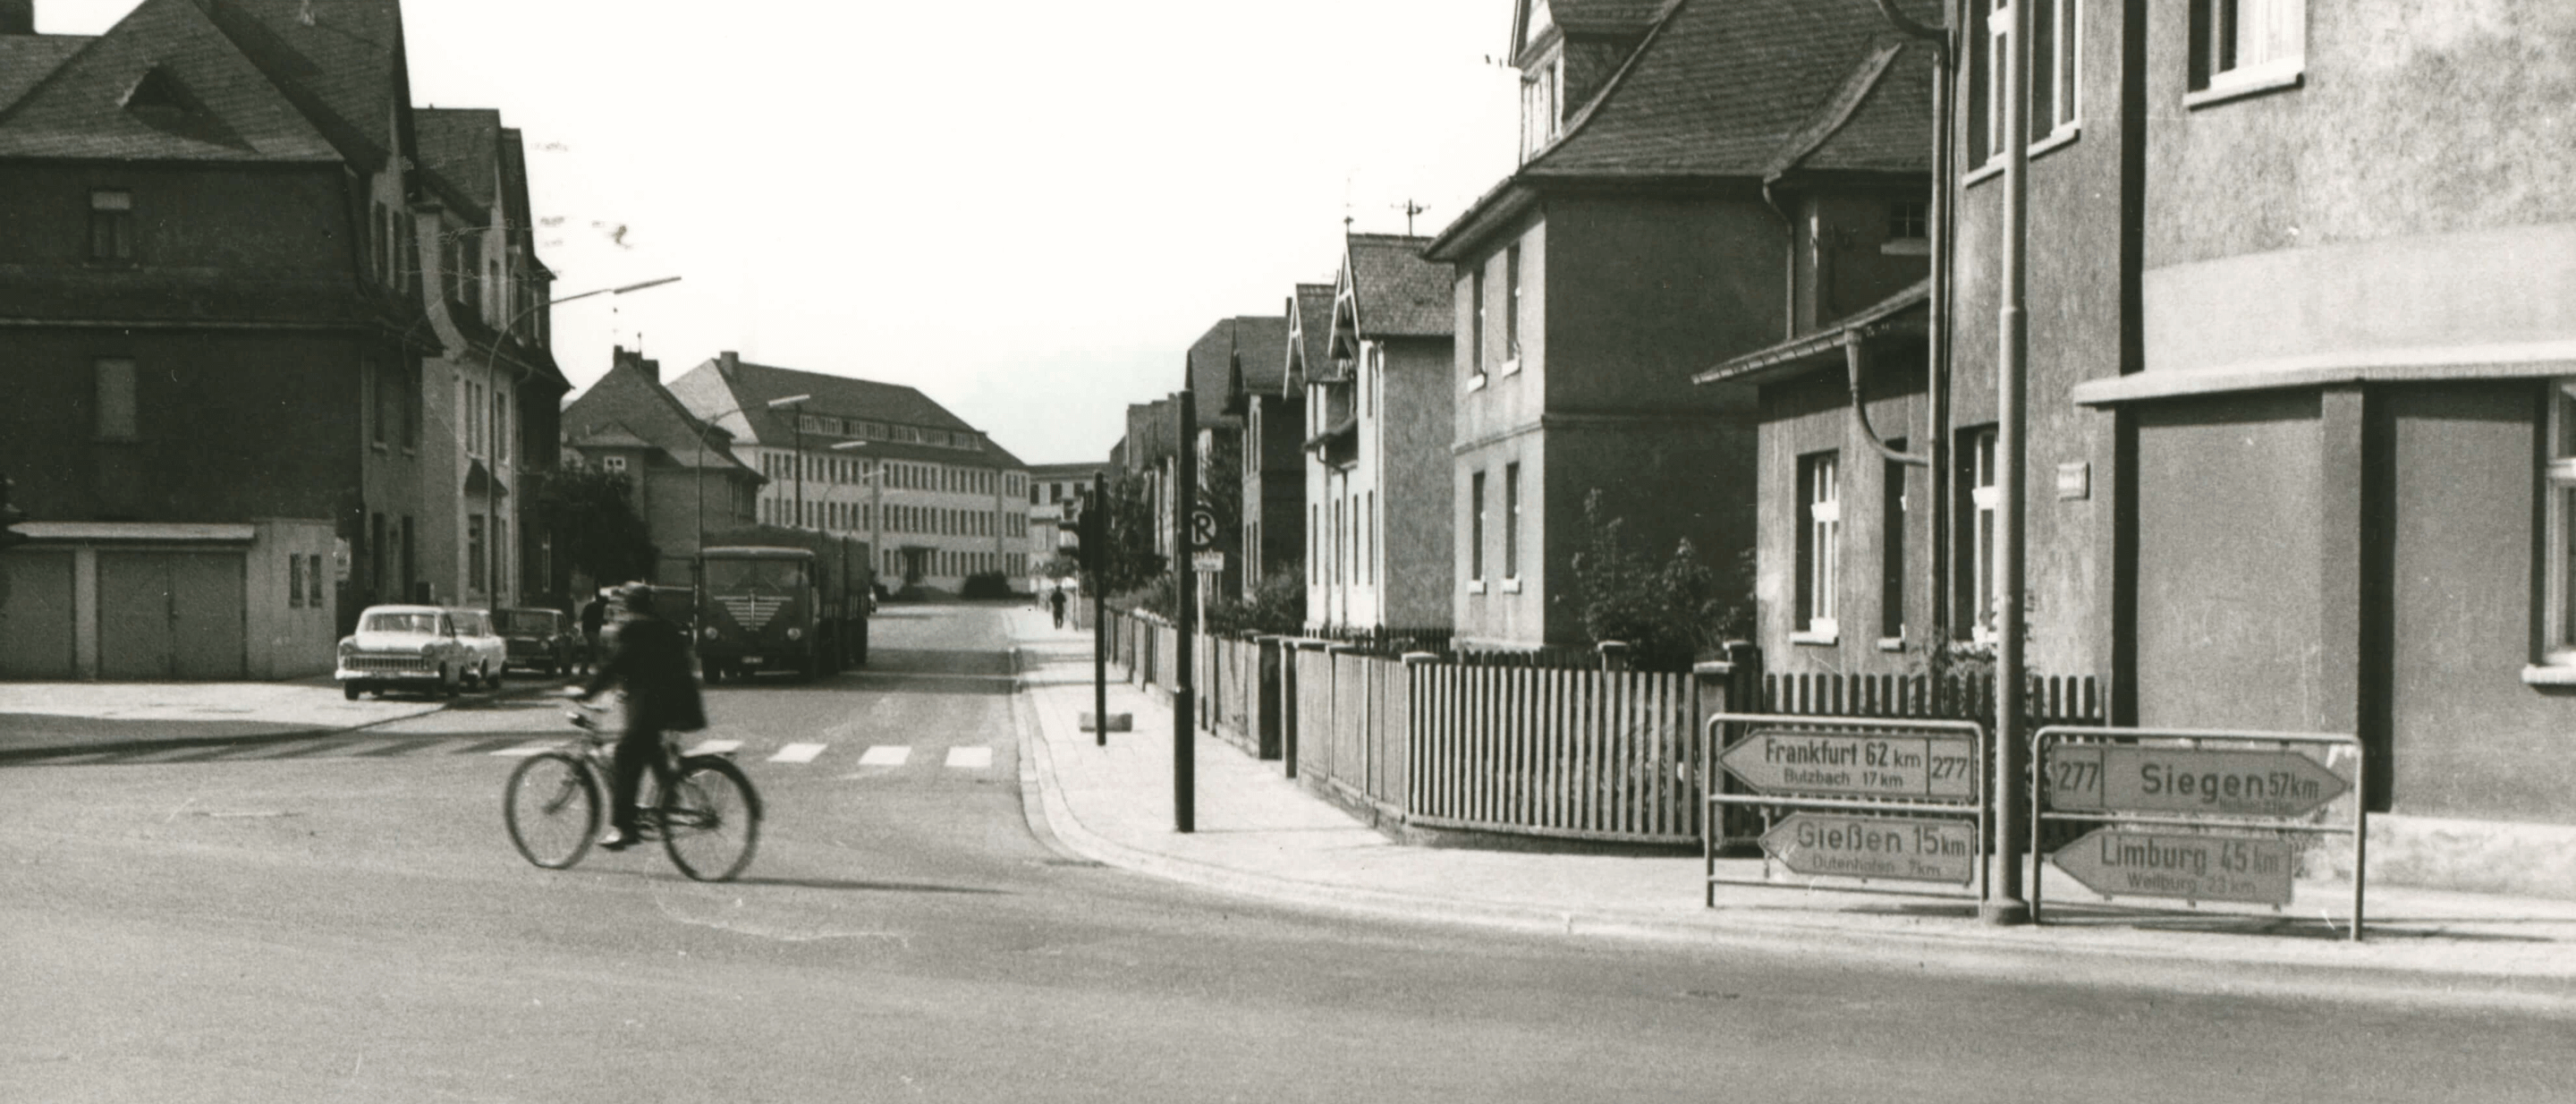 A historic photo in black and white depicting a street corner with rows of houses and a man driving past on a bike.